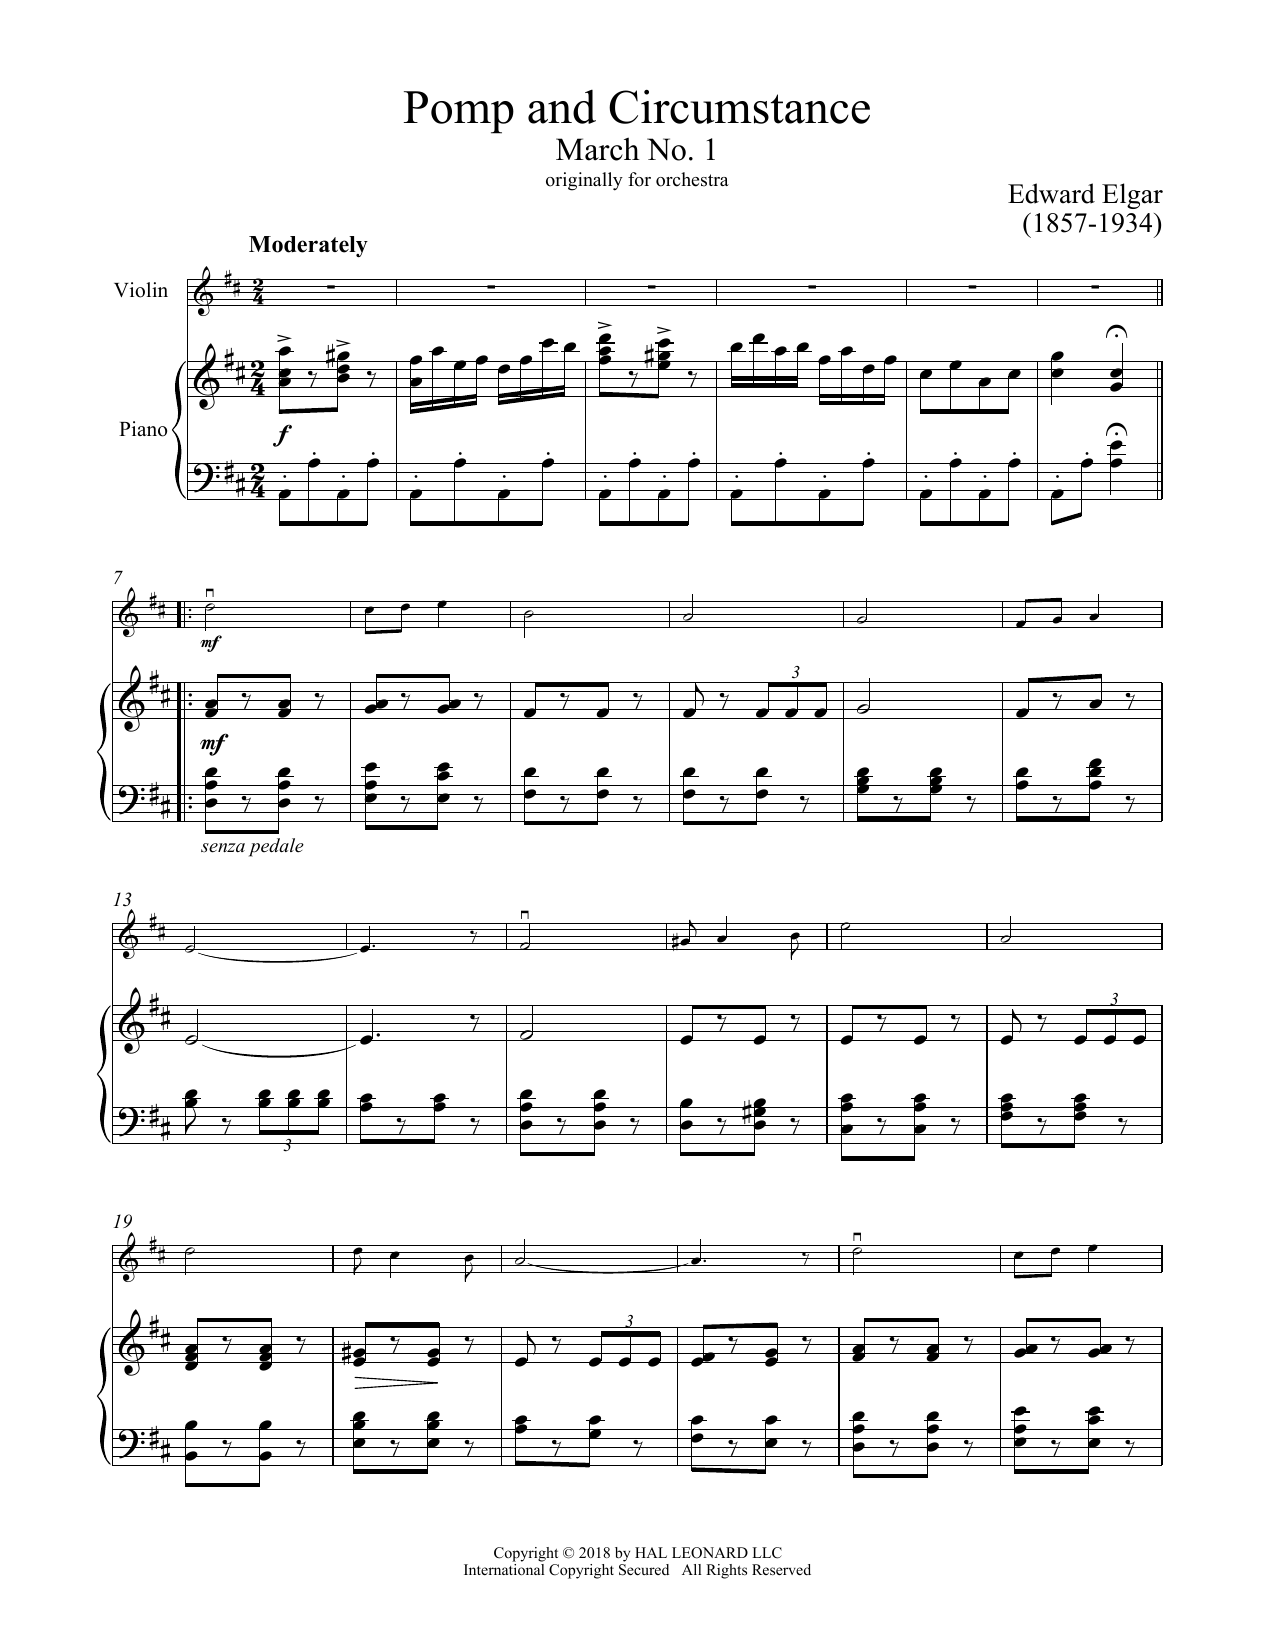 edward-elgar-pomp-and-circumstance-march-no-1-sheet-music-pdf-notes